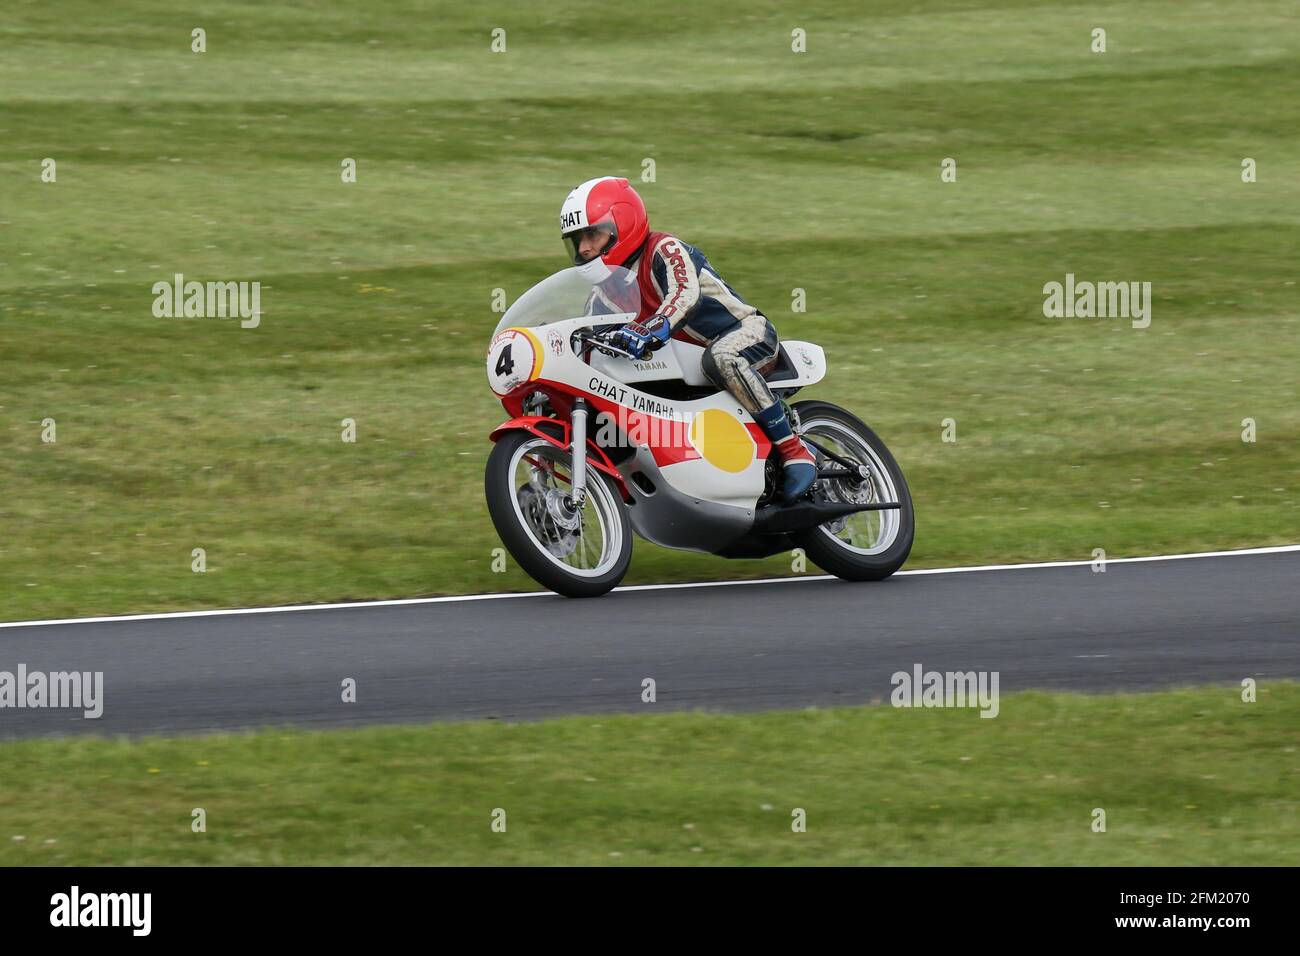 Derek Chatterton aboard his Chat Yamaha approaches The Gooseneck at the Cadwell Park International Classic in July 2015 Stock Photo